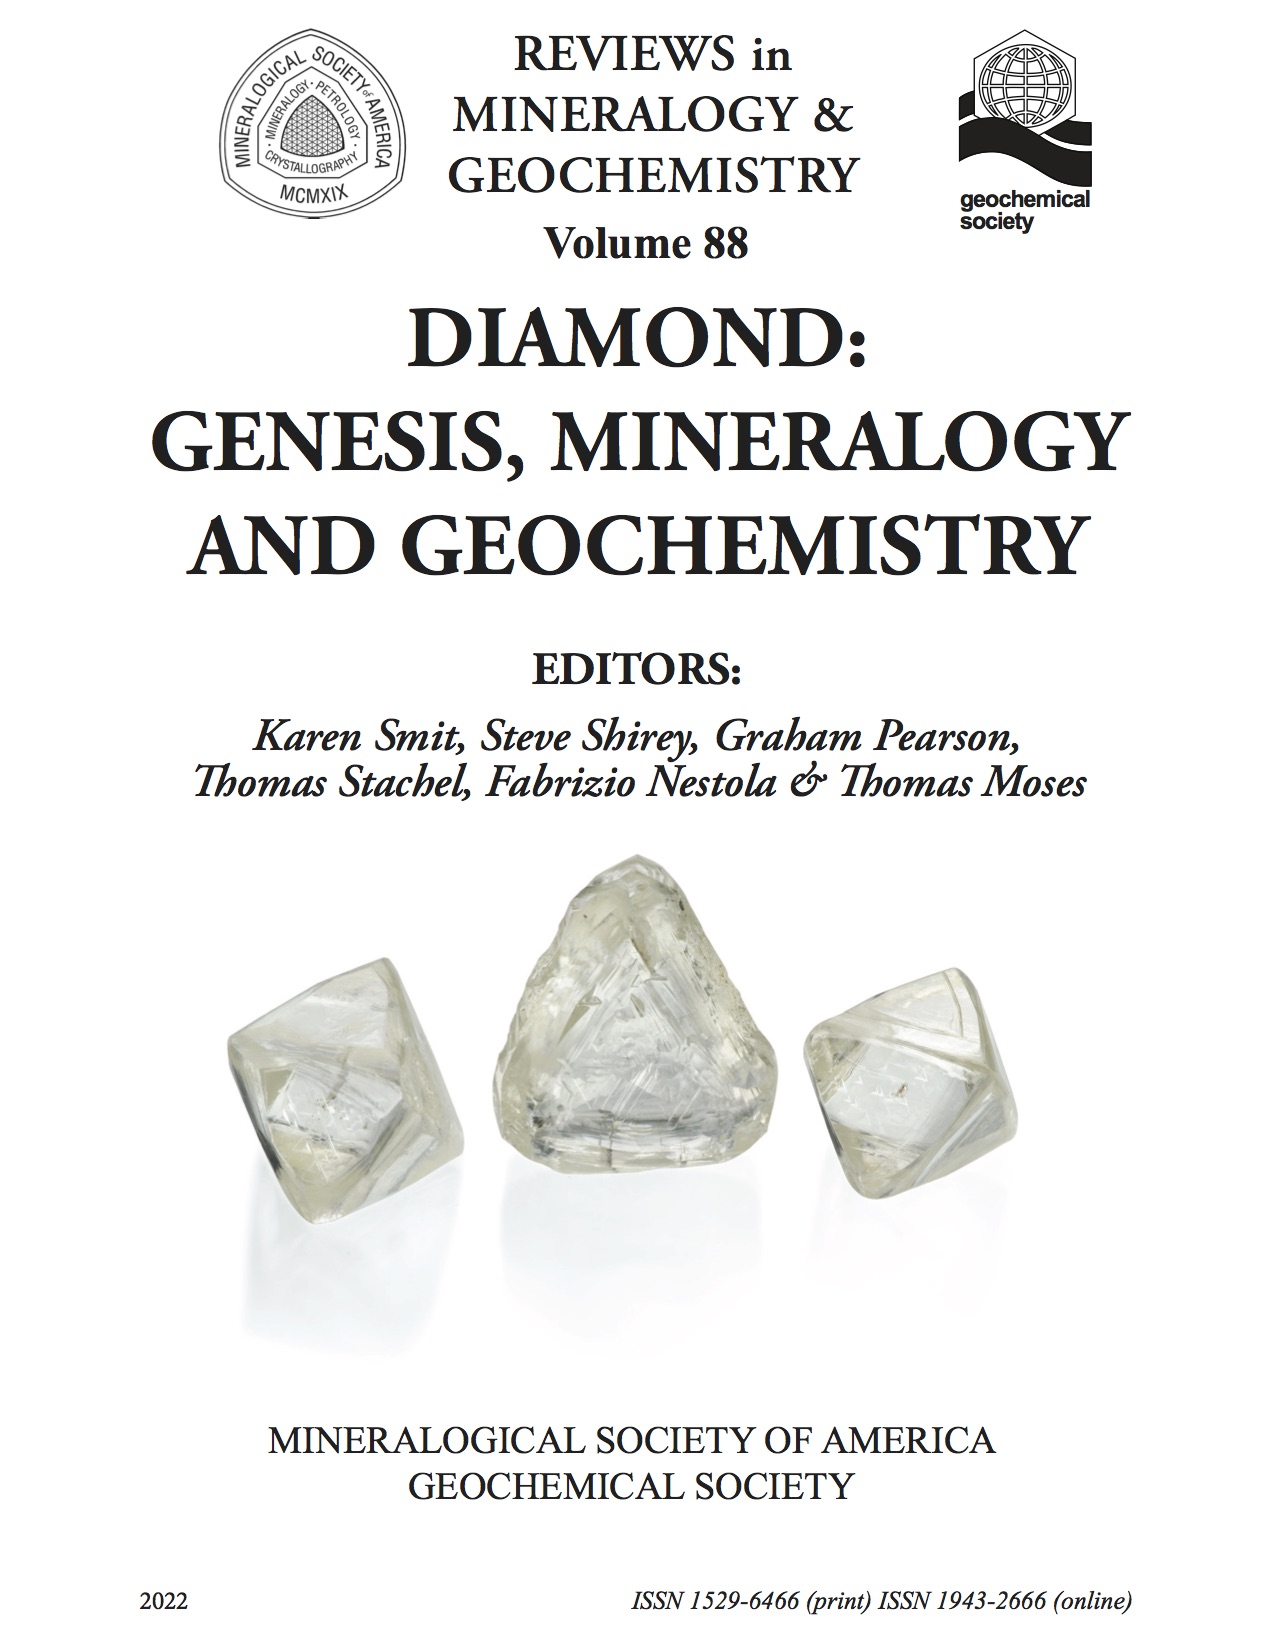 Front Cover of Reviews in Mineralogy and Geochmistry vol 88